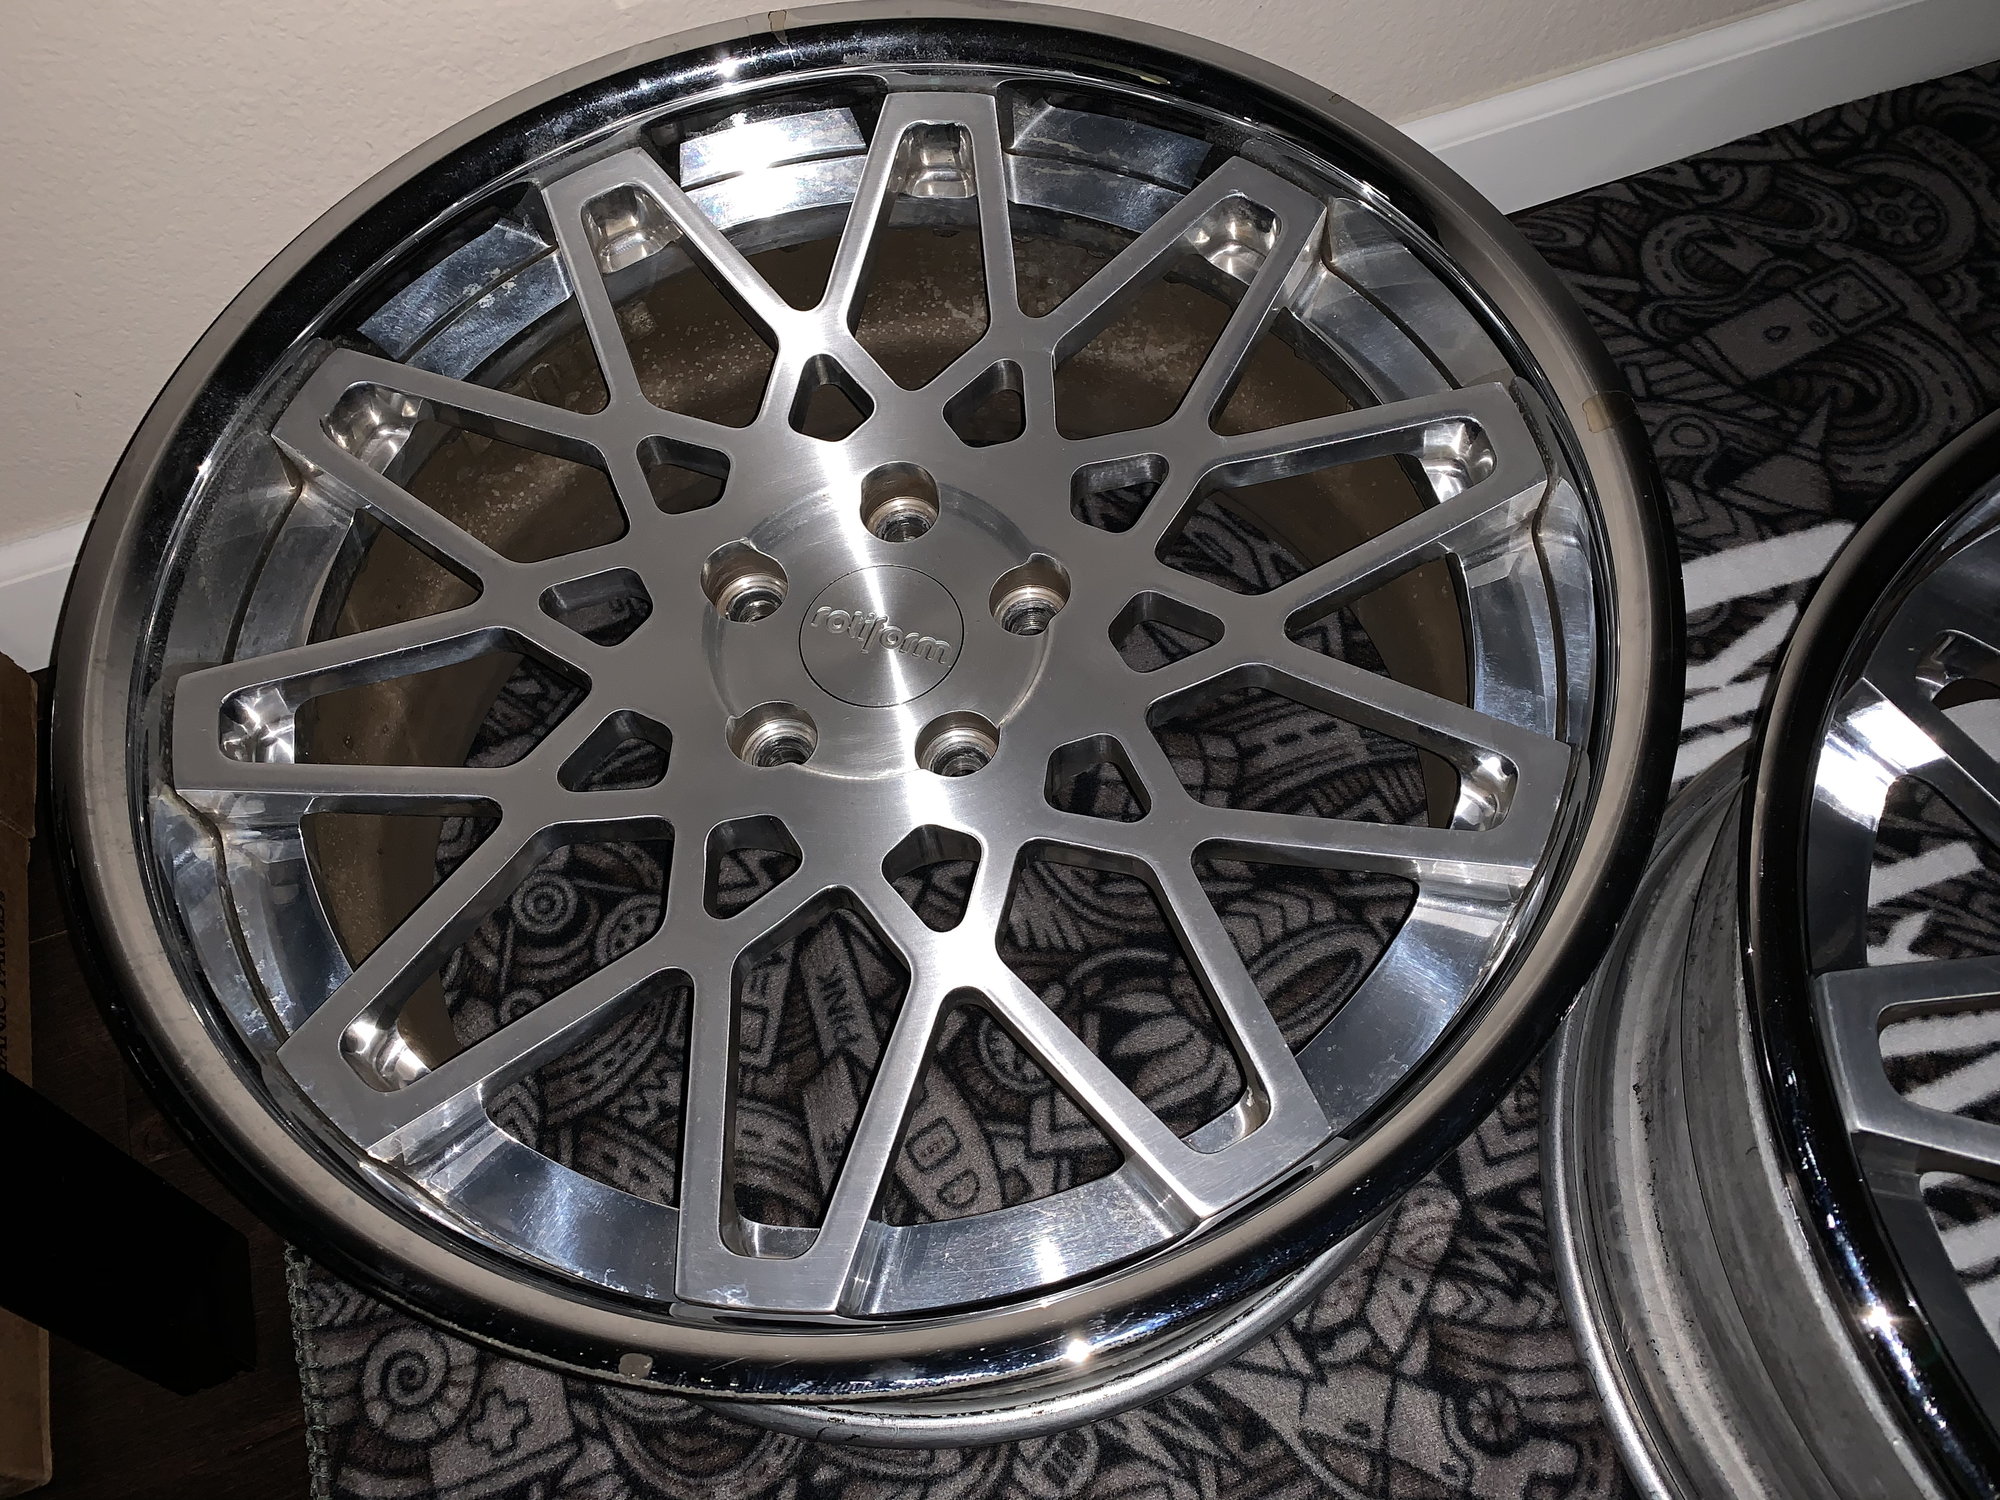 Wheels and Tires/Axles - *Rare* 19" Rotiform BLQ 3-Piece Forged Staggered Wheels with NEW Michelins - Used - 2000 to 2020 Mercedes-Benz All Models - 2000 to 2020 Audi All Models - 2000 to 2020 BMW All Models - 2000 to 2020 Volkswagen All Models - San Jose, CA 95125, United States